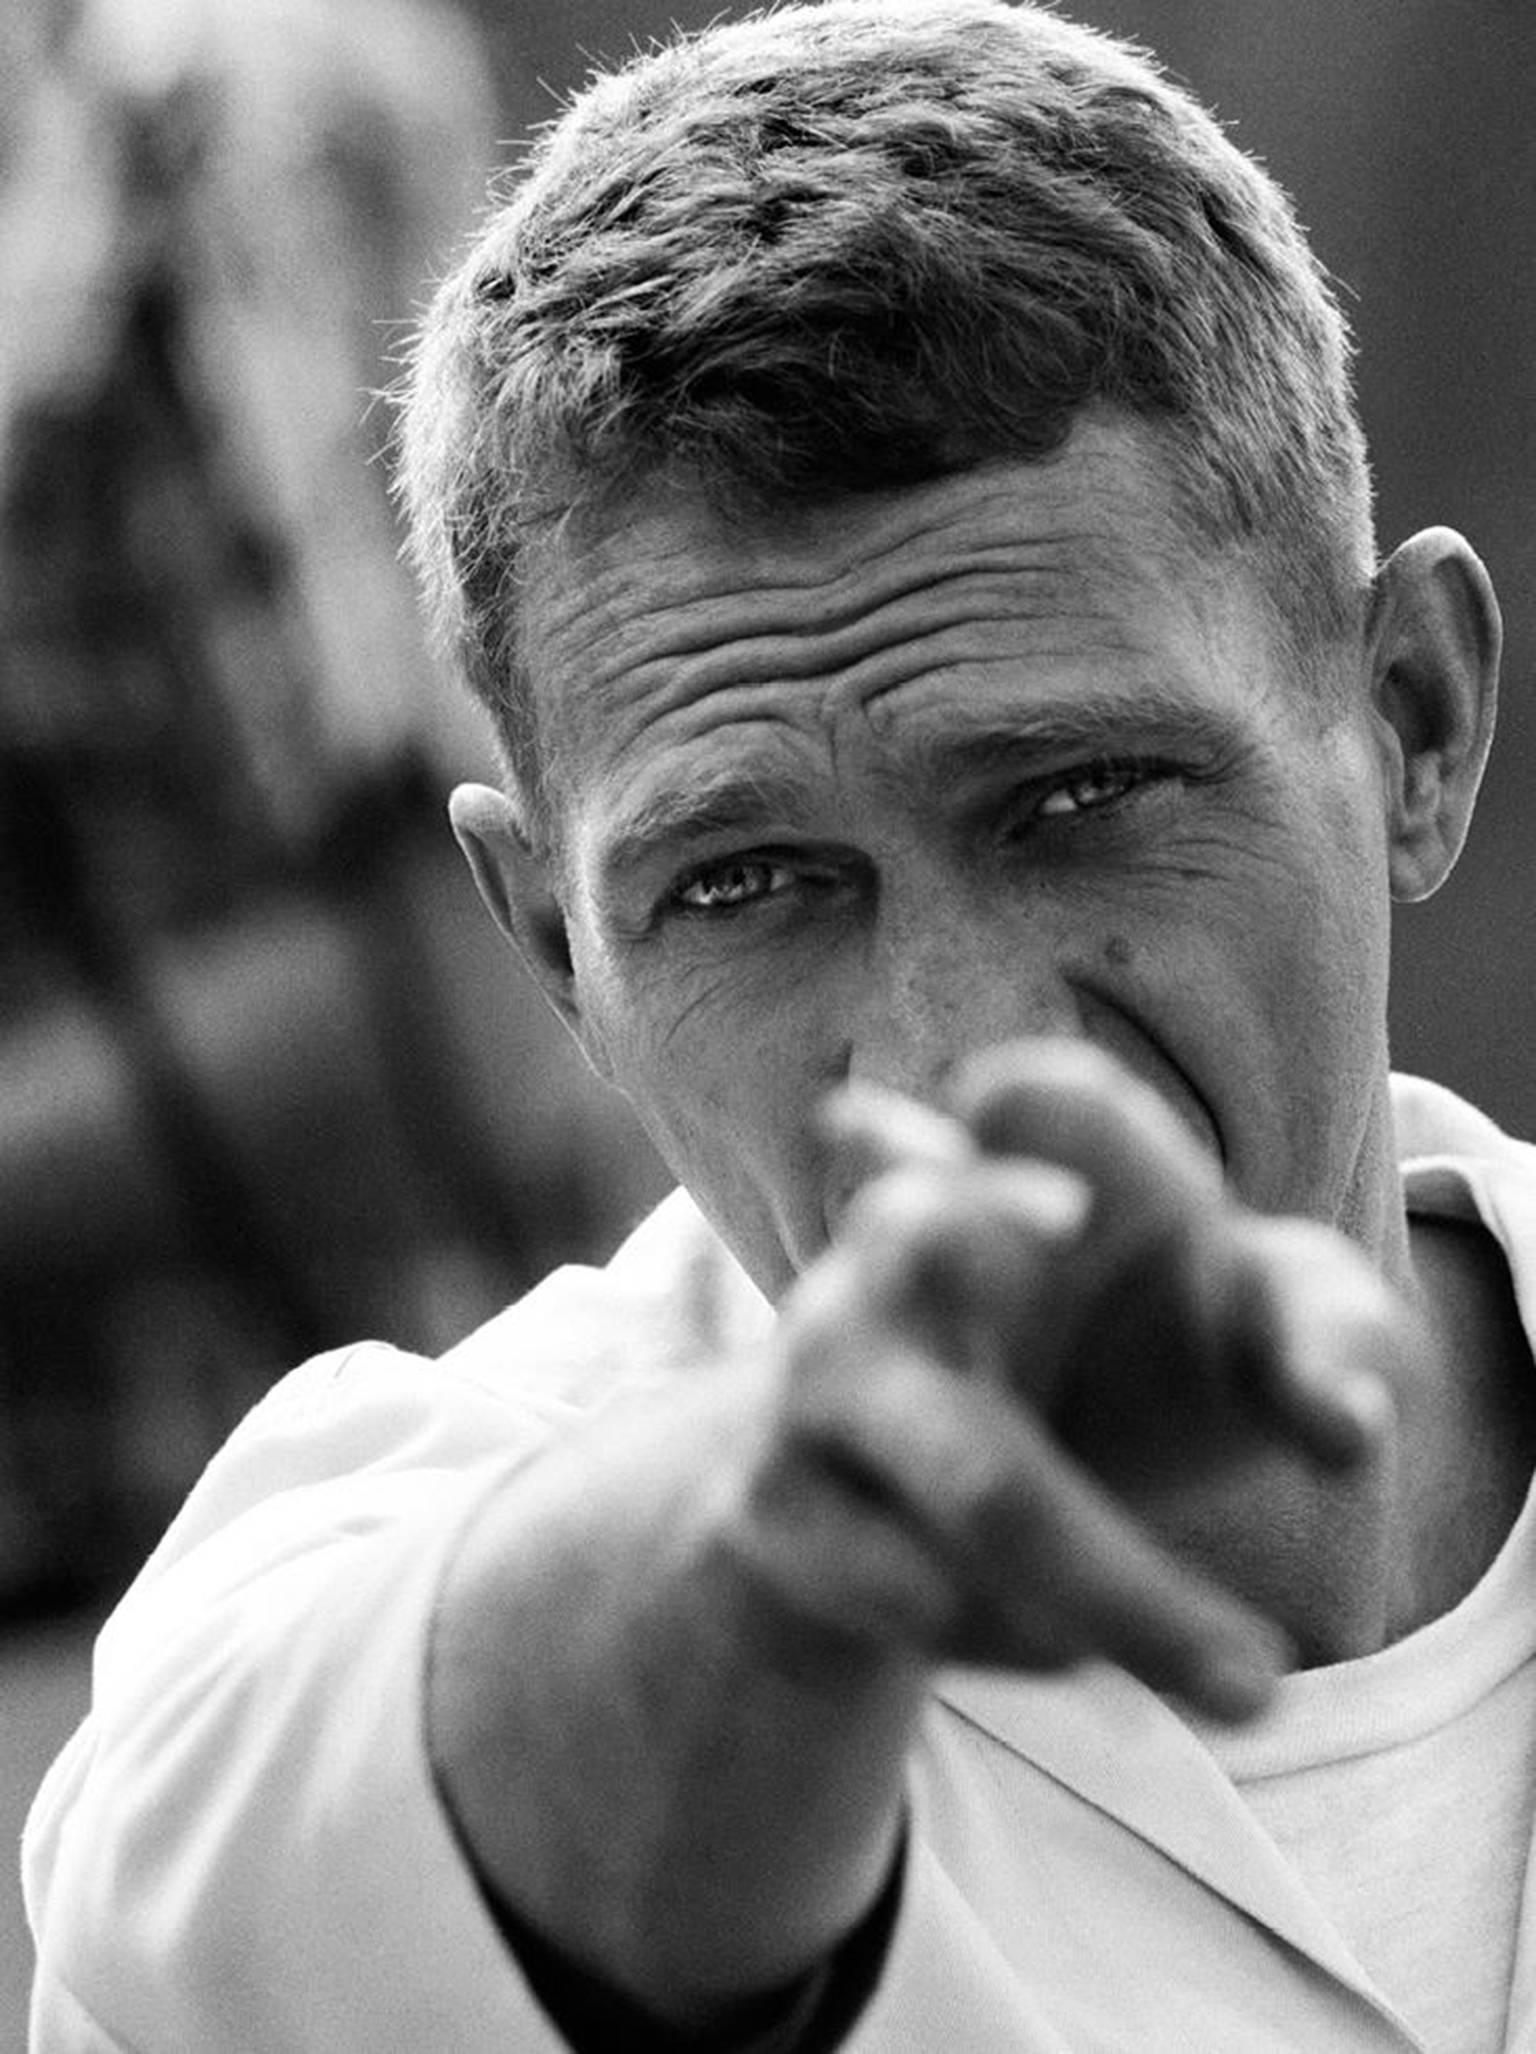 Steve McQueen, filming “The Sand Pebbles,” Taiwan, 1966